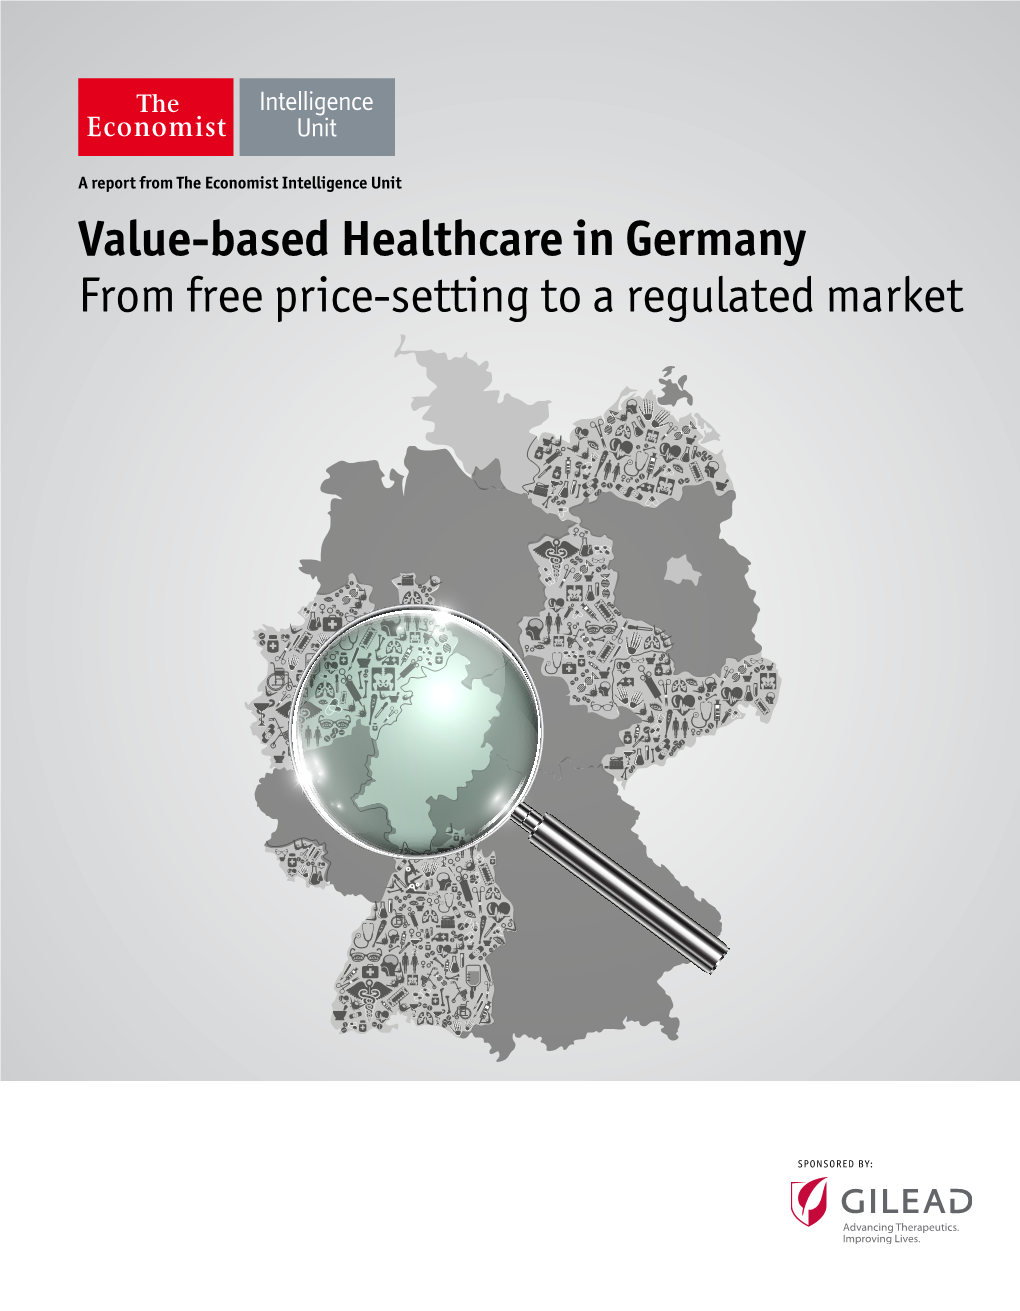 Value-Based Healthcare in Germany from Free Price-Setting to a Regulated Market